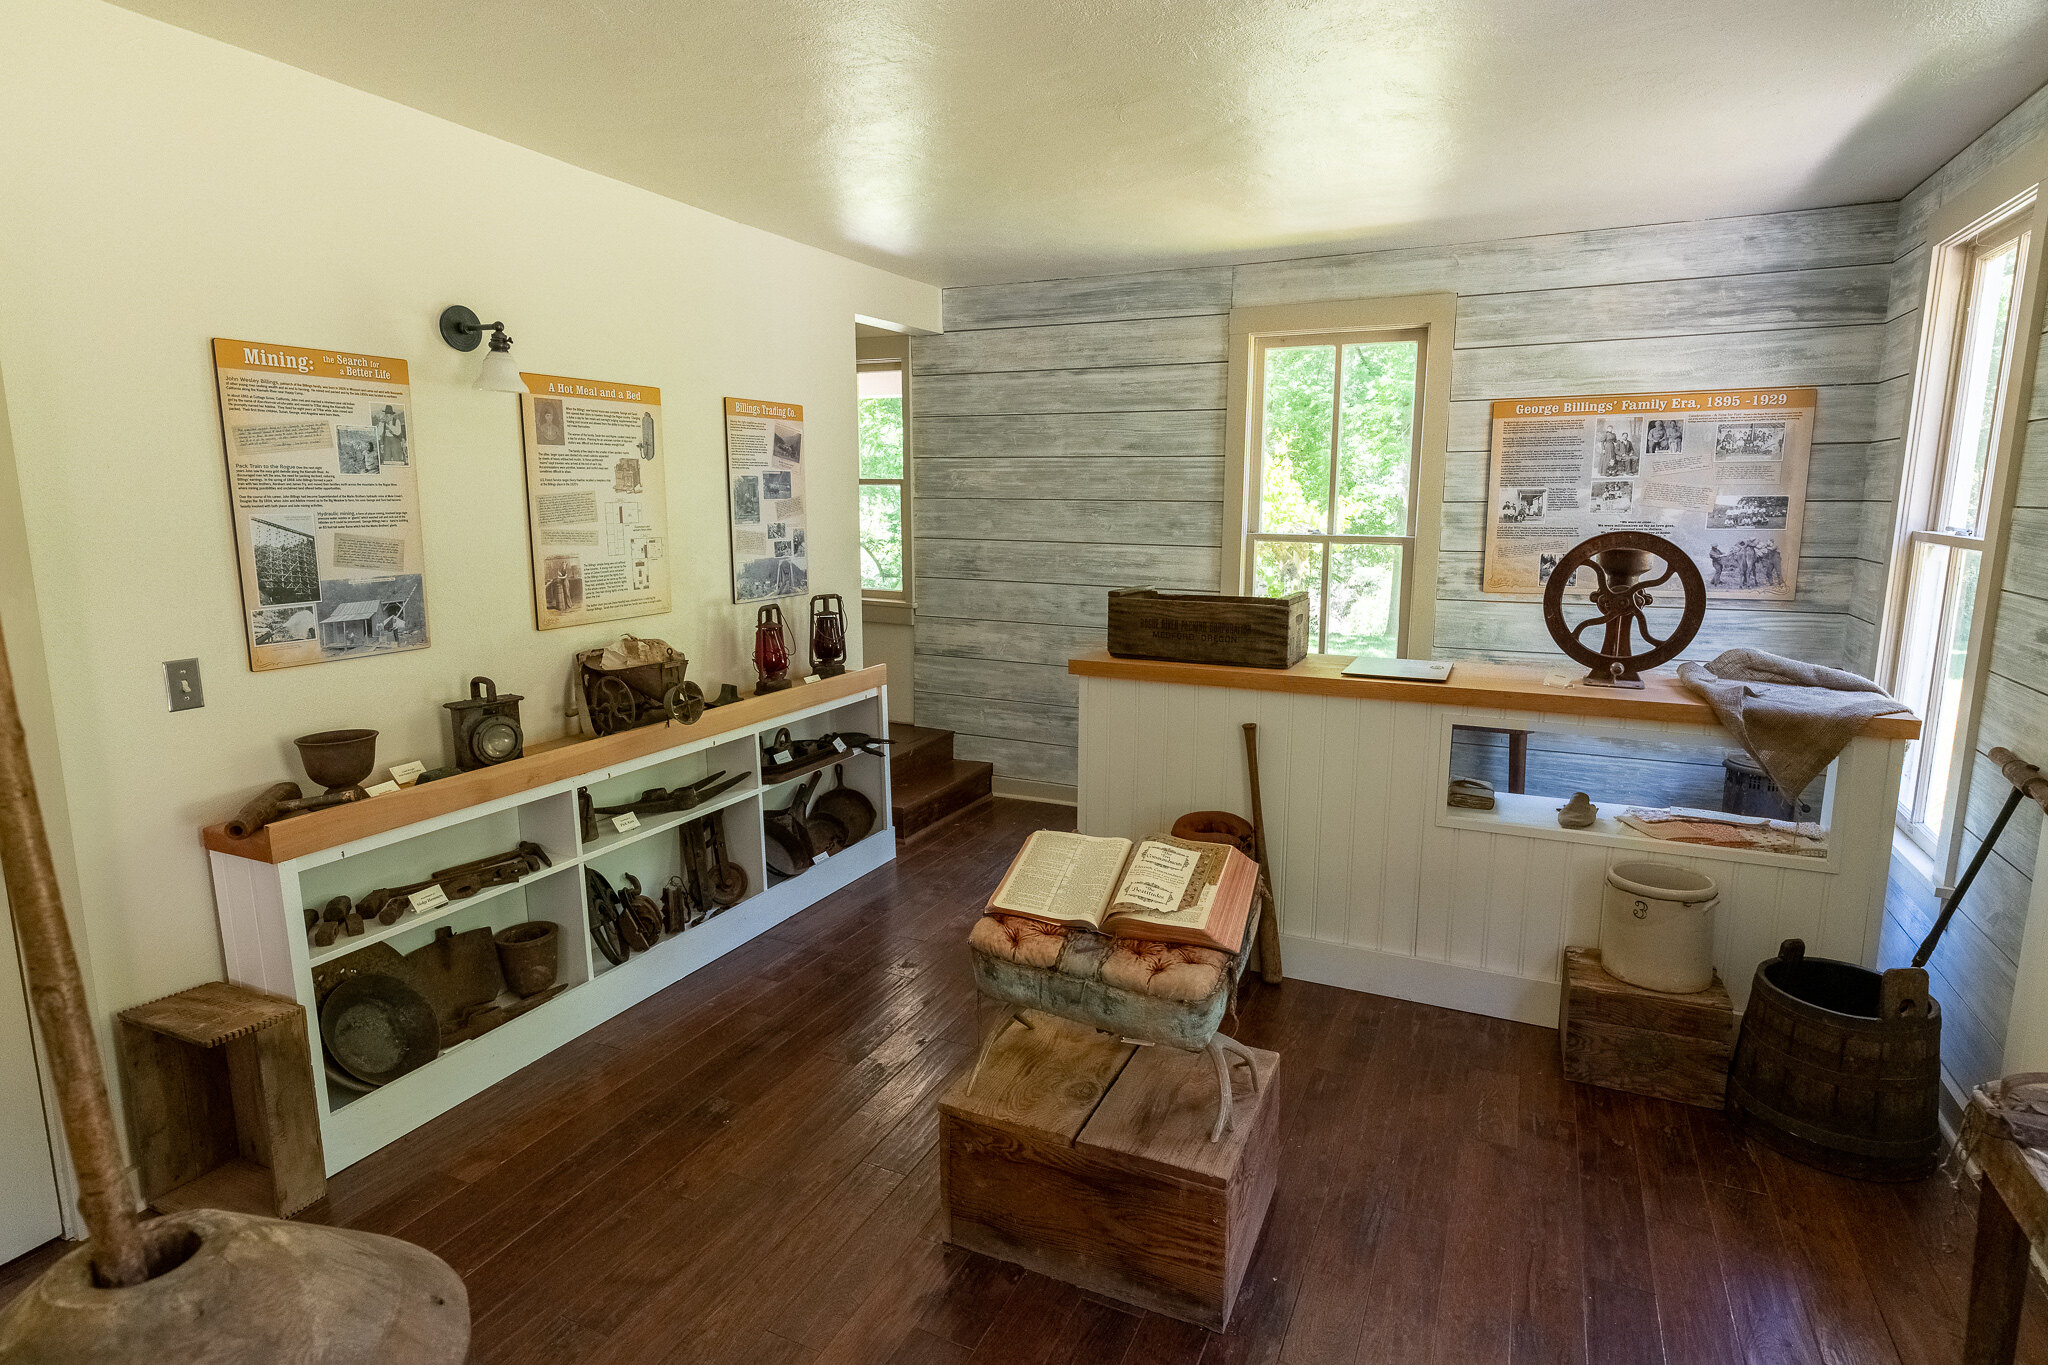 View inside the Rogue River Ranch museum.